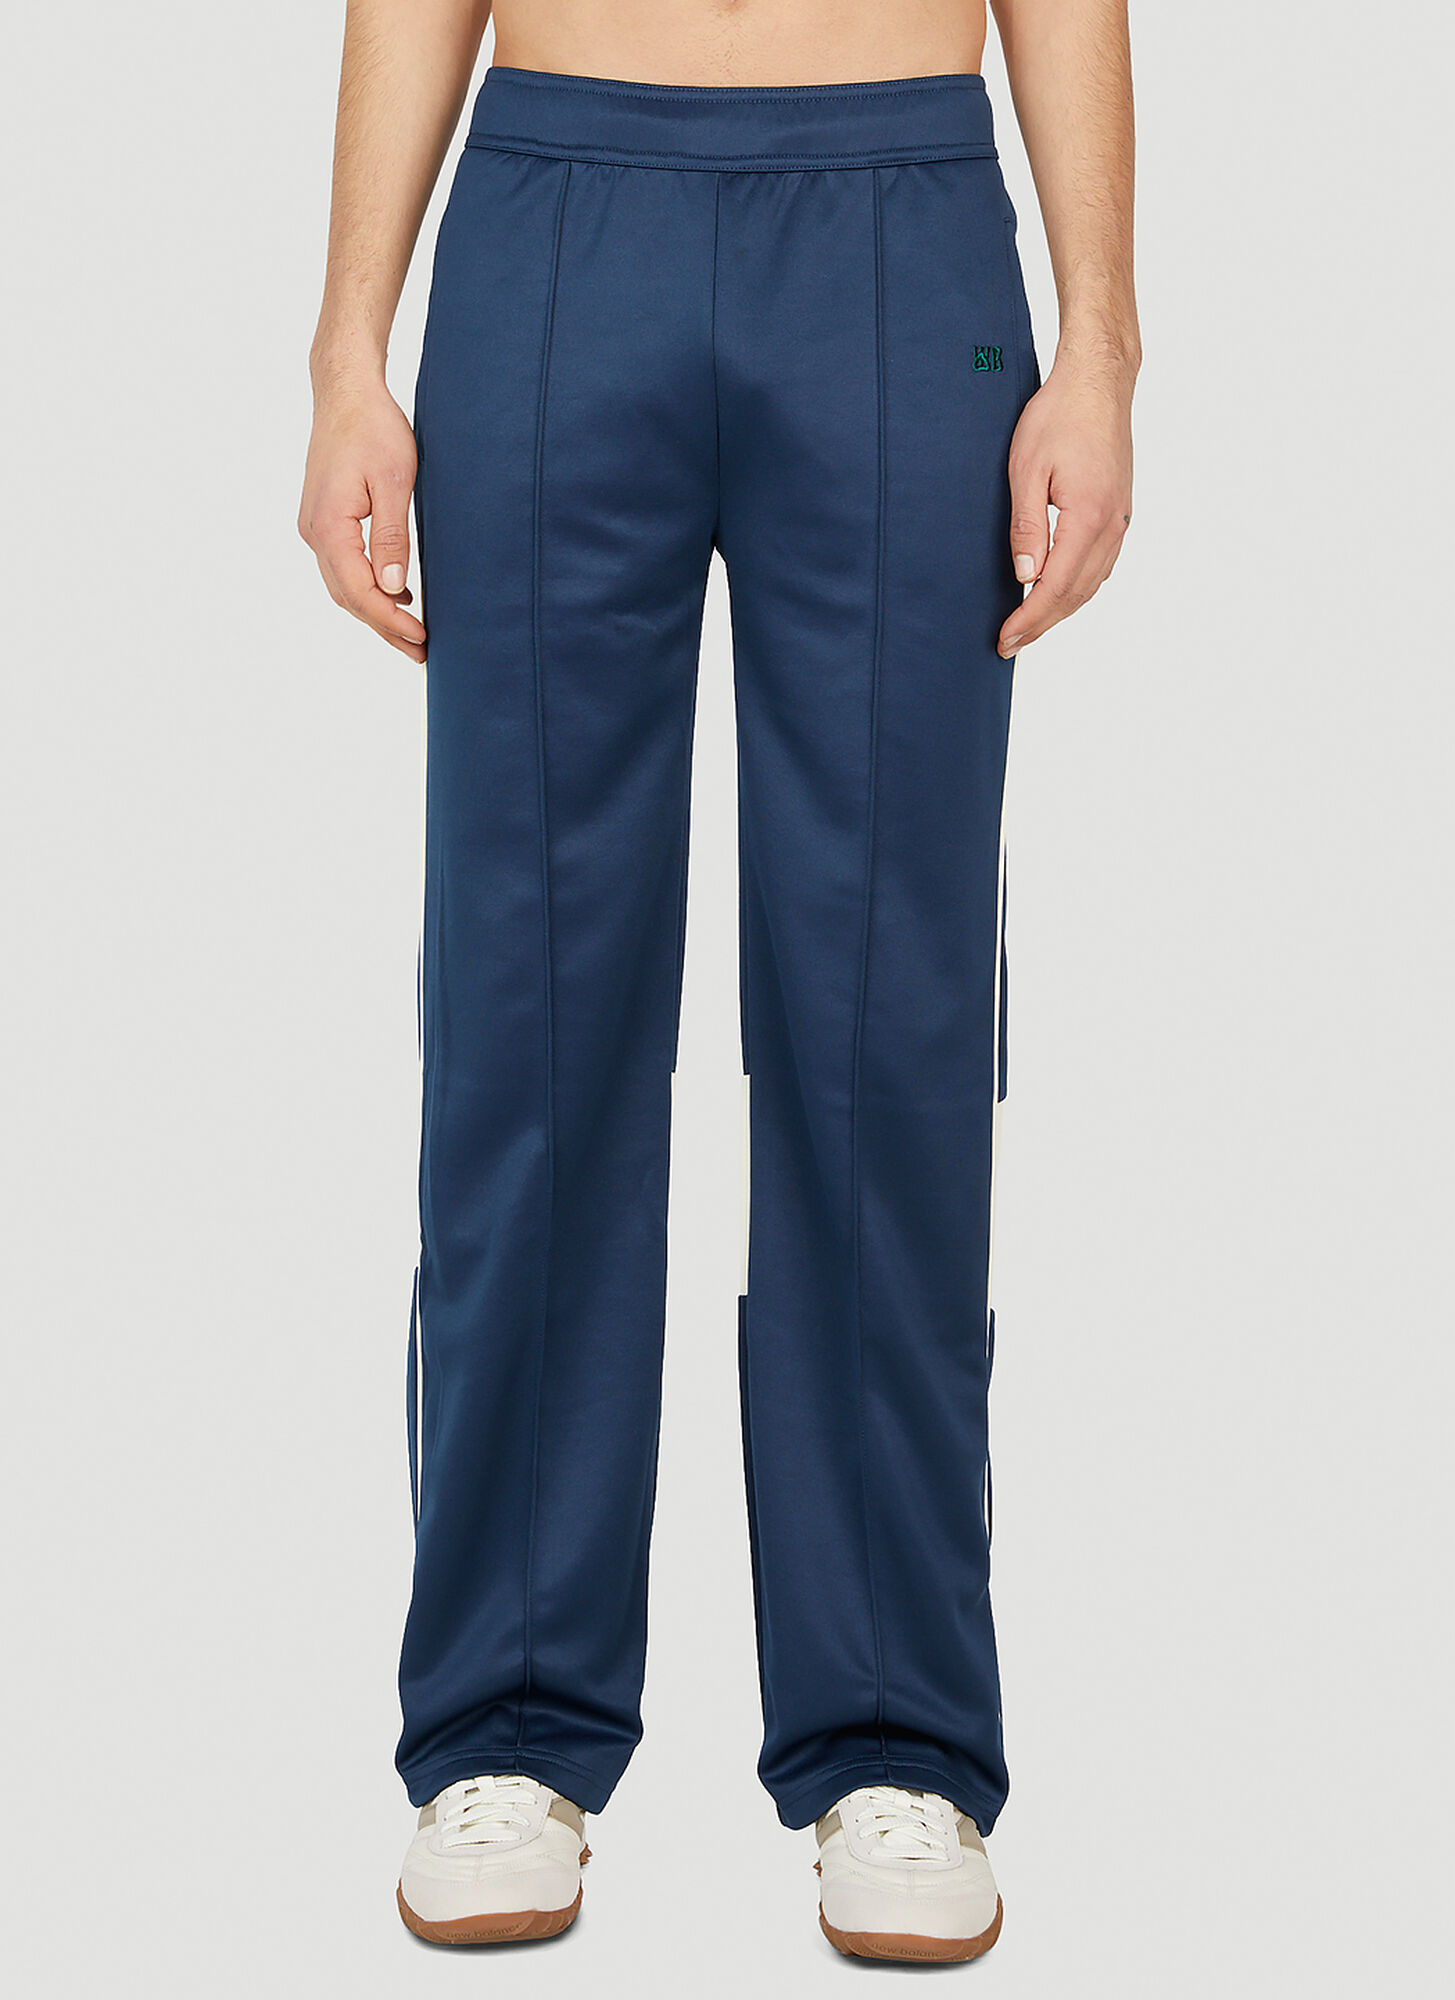 Wales Bonner Logo Embroidery Track Pants In Blue